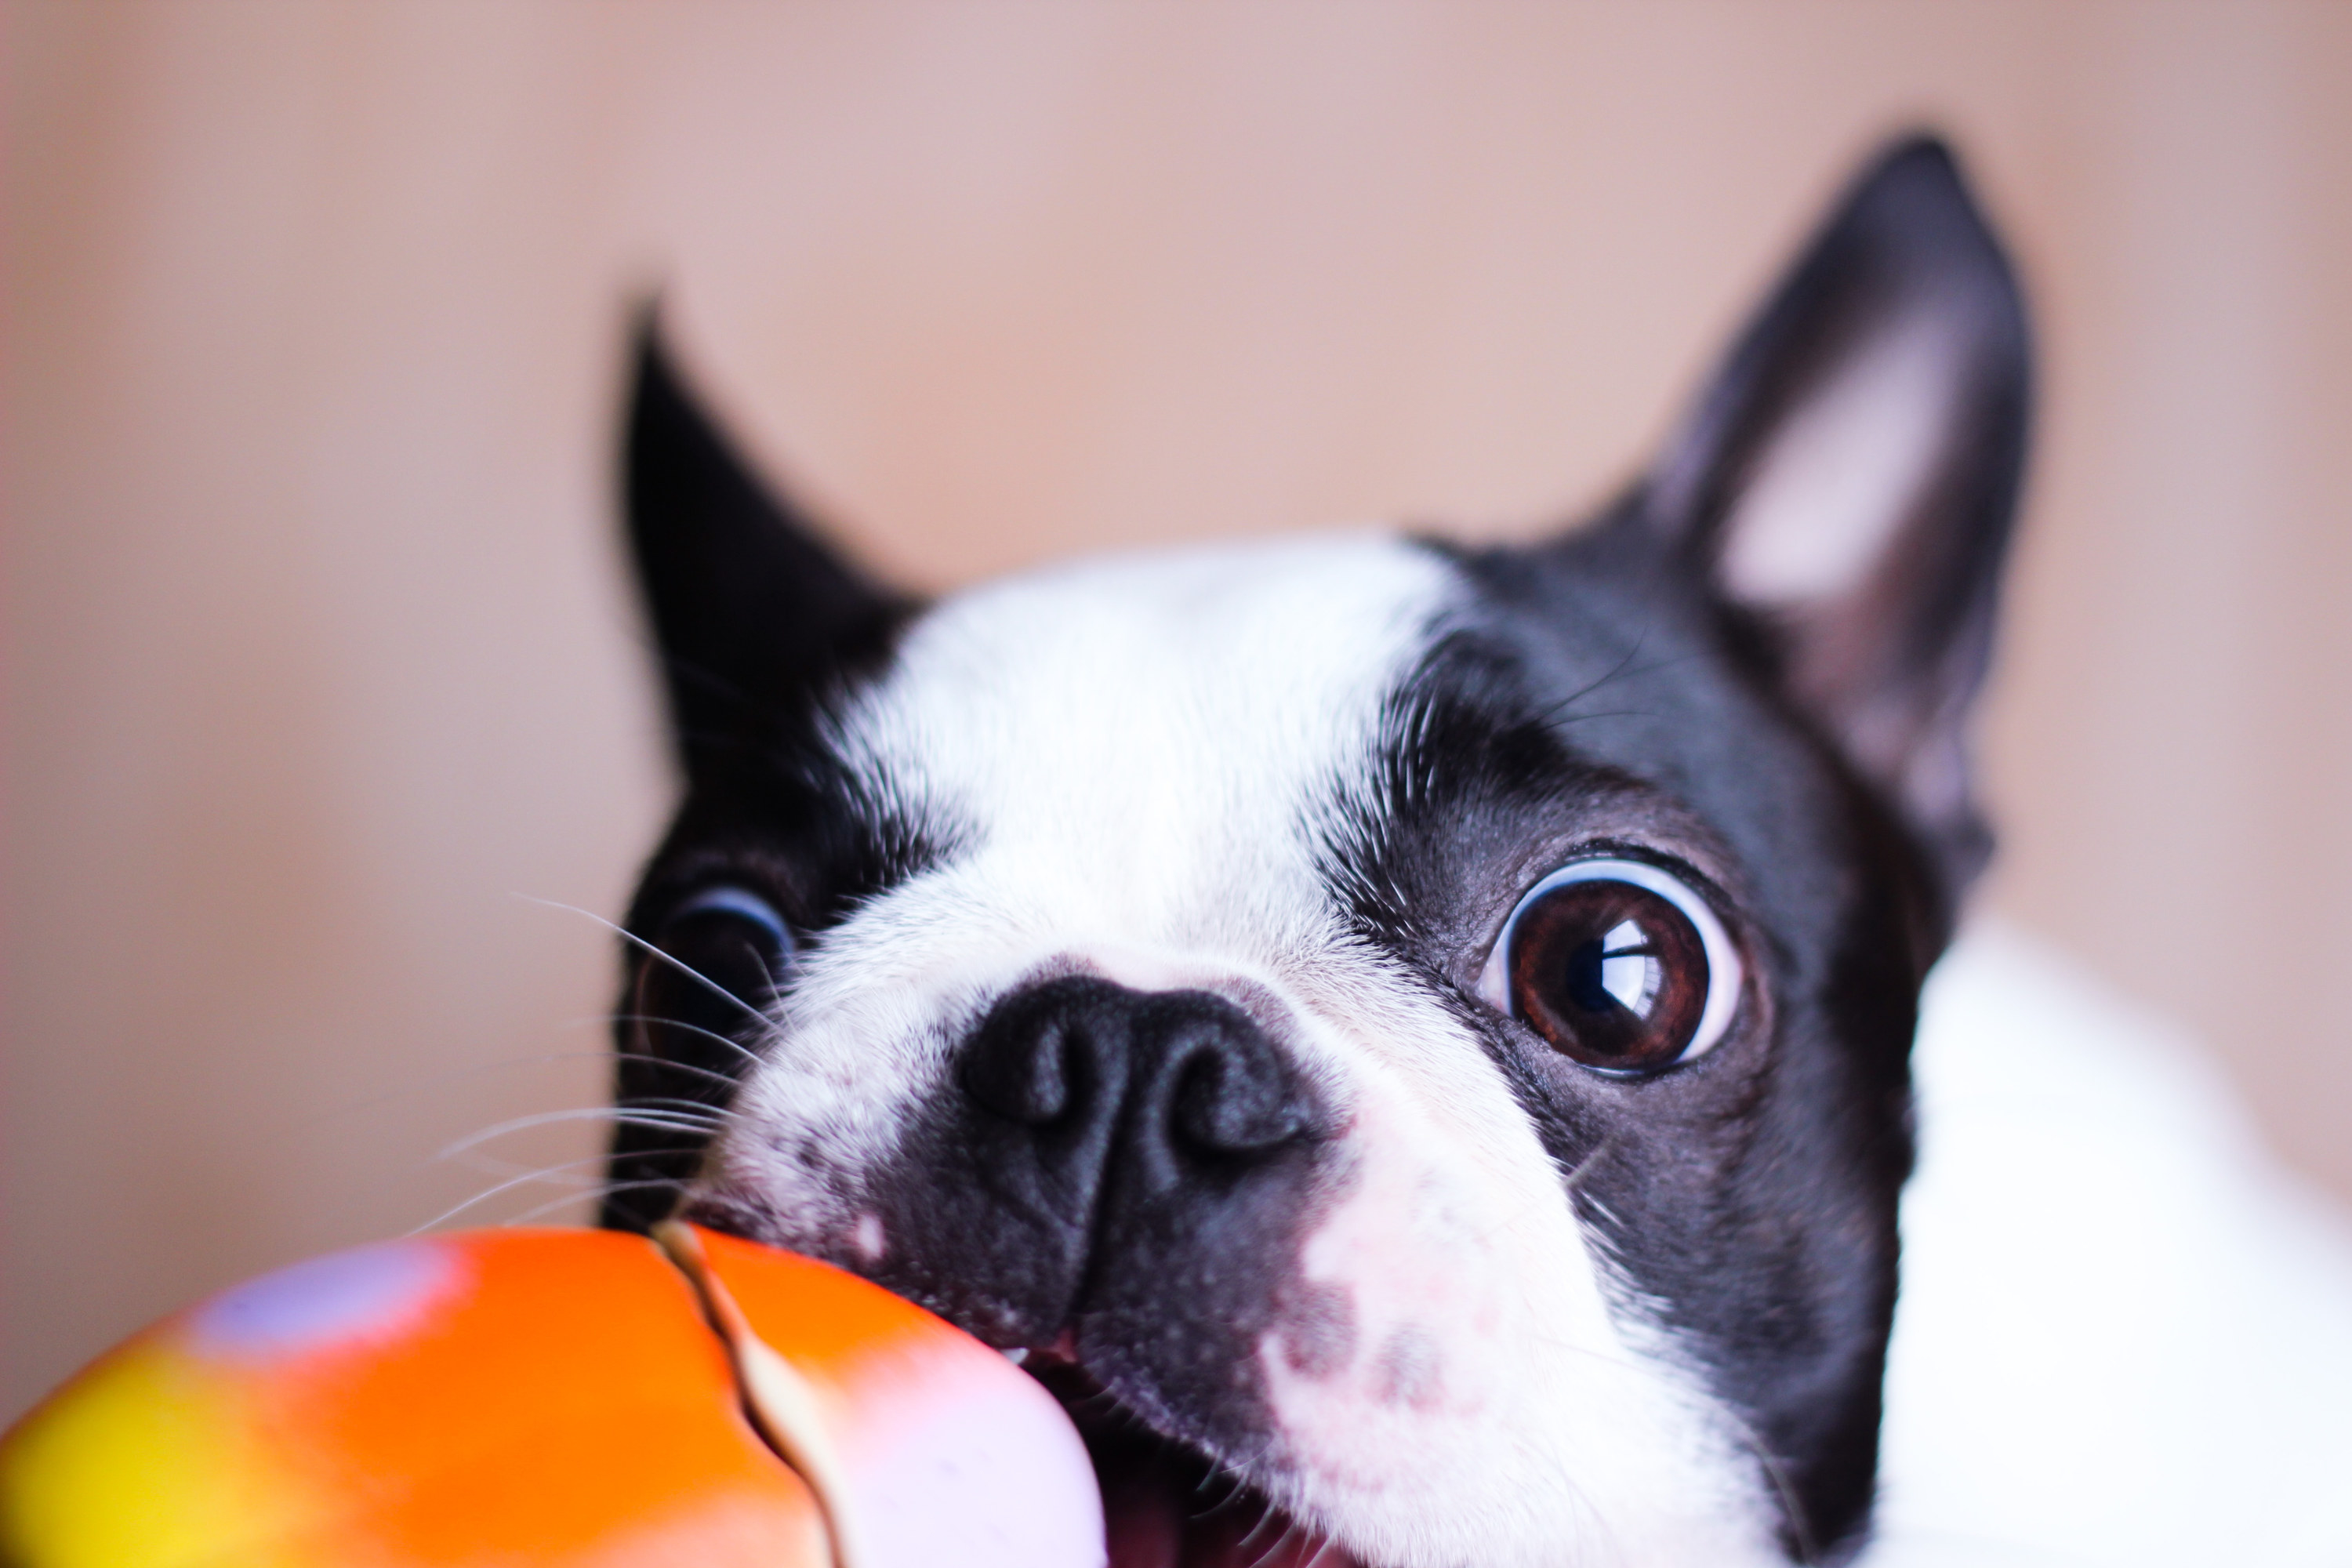 Boston terrier plays with a squeaky toy